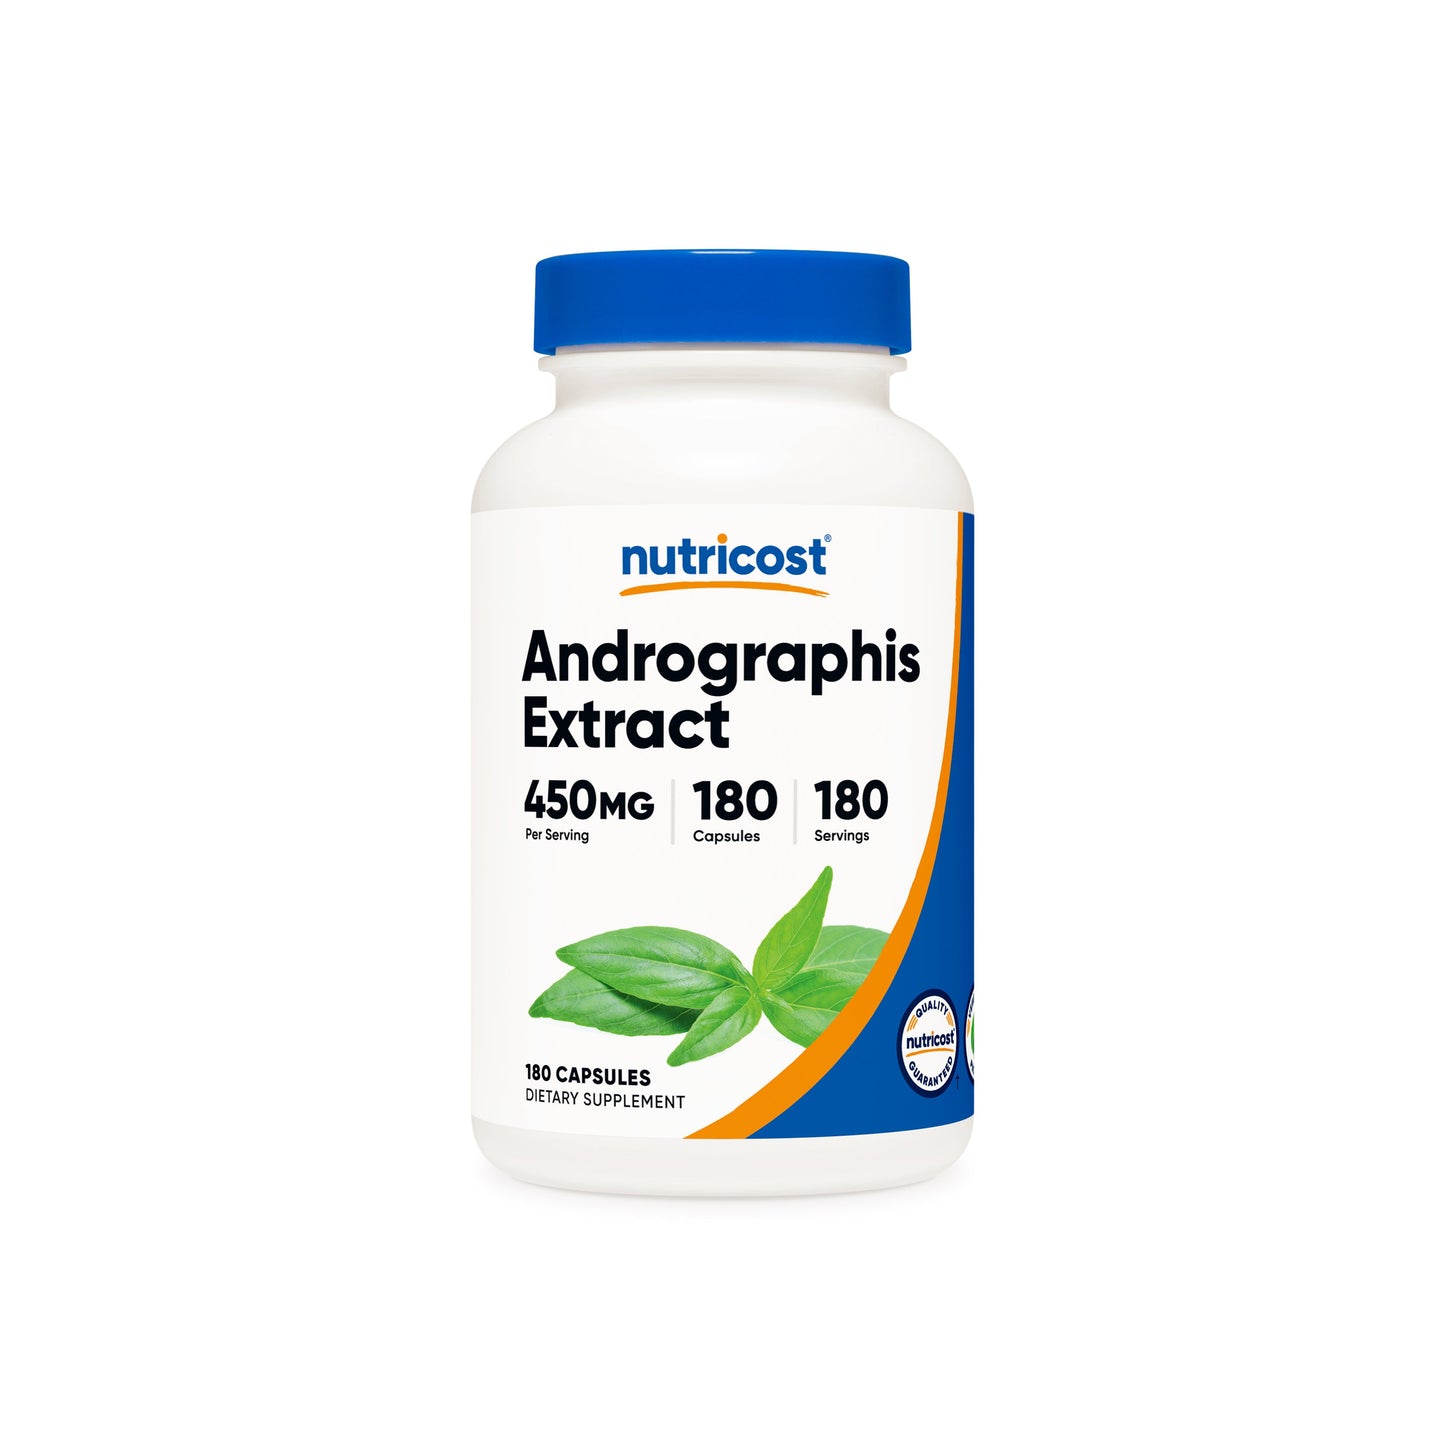 Nutricost Andrographis Extract Capsules